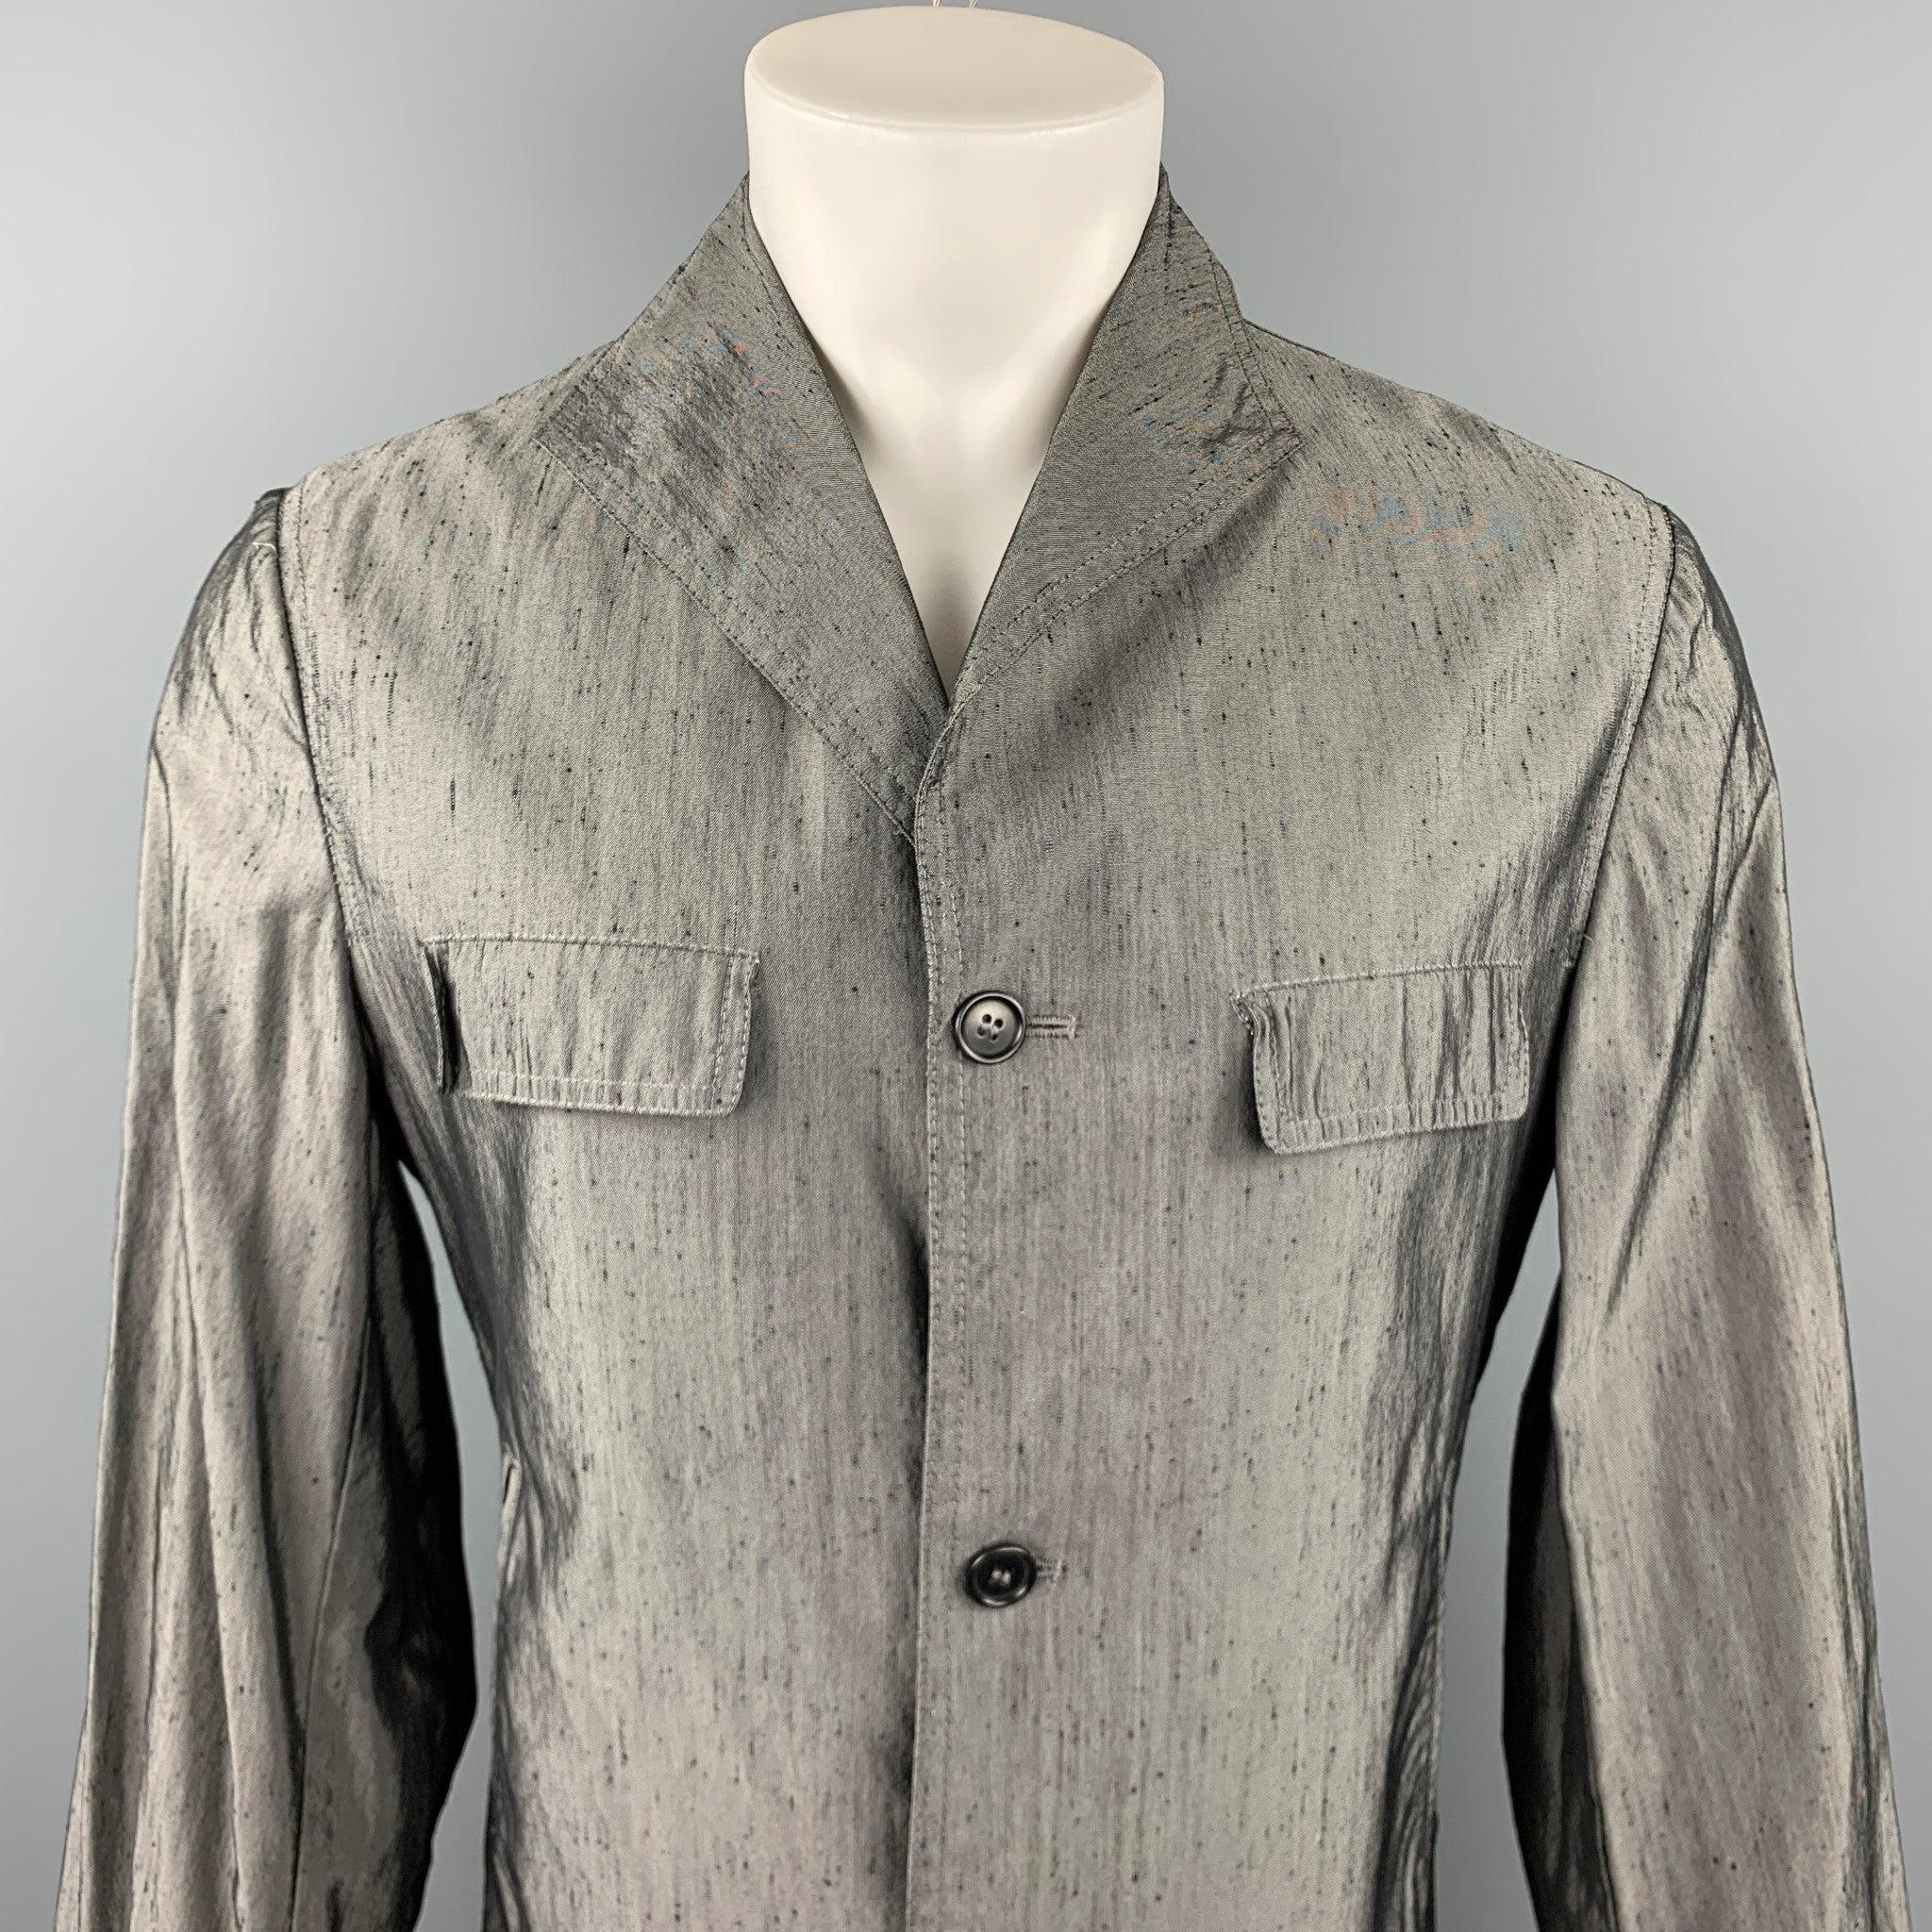 CoSTUME HOMME jacket comes in a grey textured cotton featuring a spread collar, slit pockets, and a buttoned closure. Made in Italy.Excellent
 Pre-Owned Condition. 
 

 Marked:  50 
 

 Measurements: 
  
 Shoulder: 18 inches 
 Chest: 40 inches 
